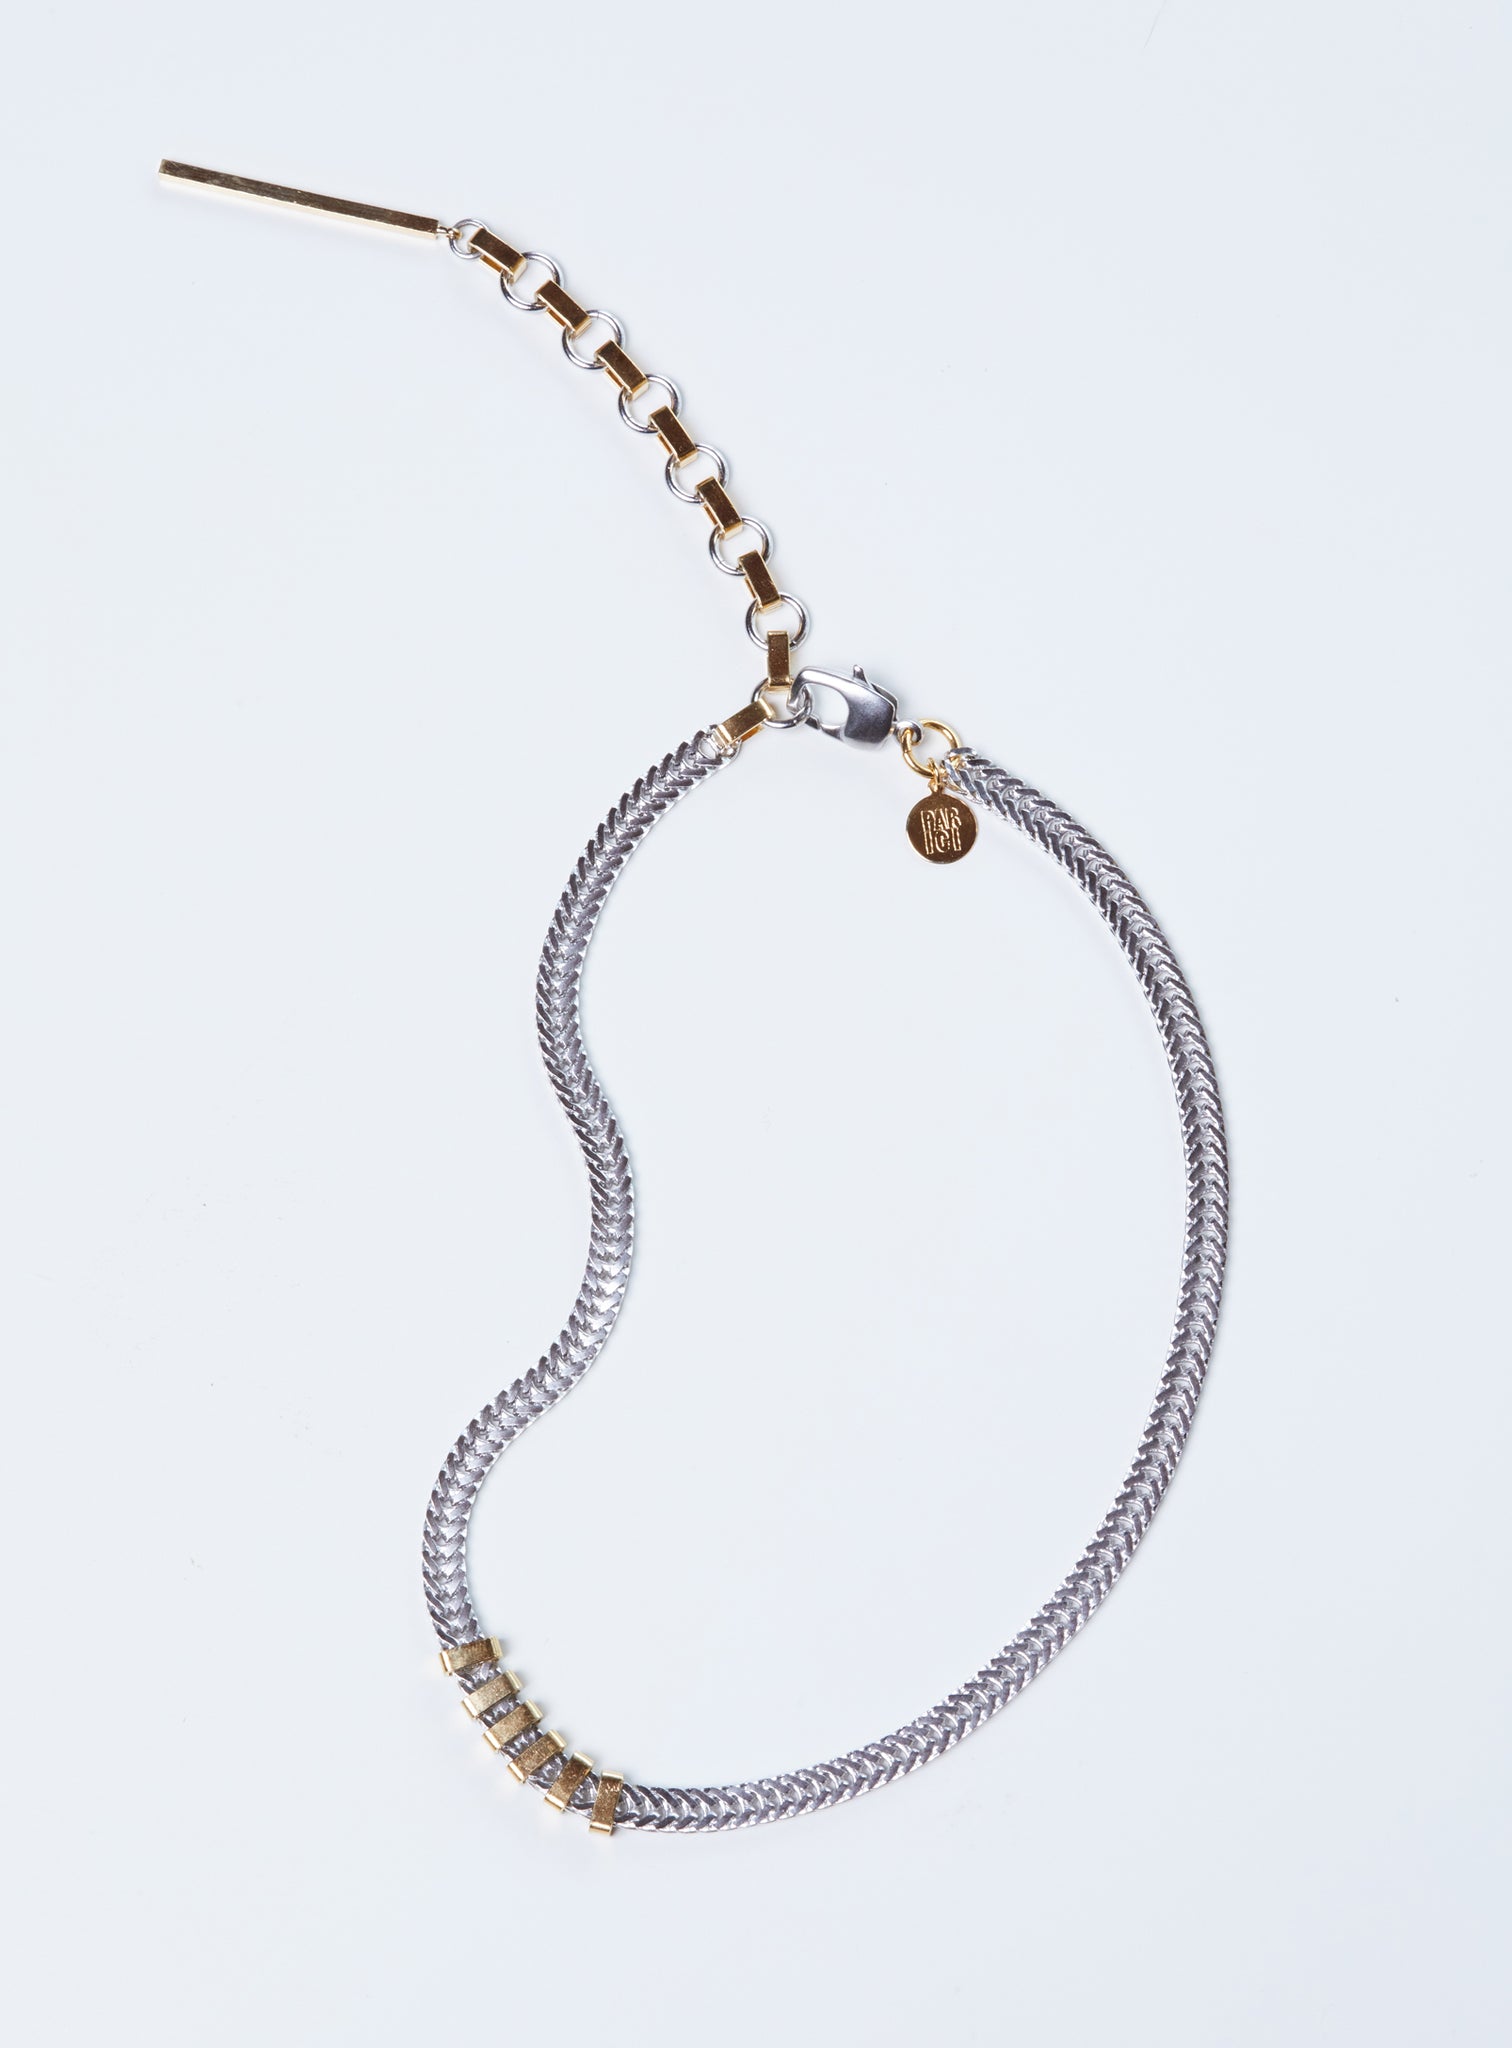 Flat Chain Necklace